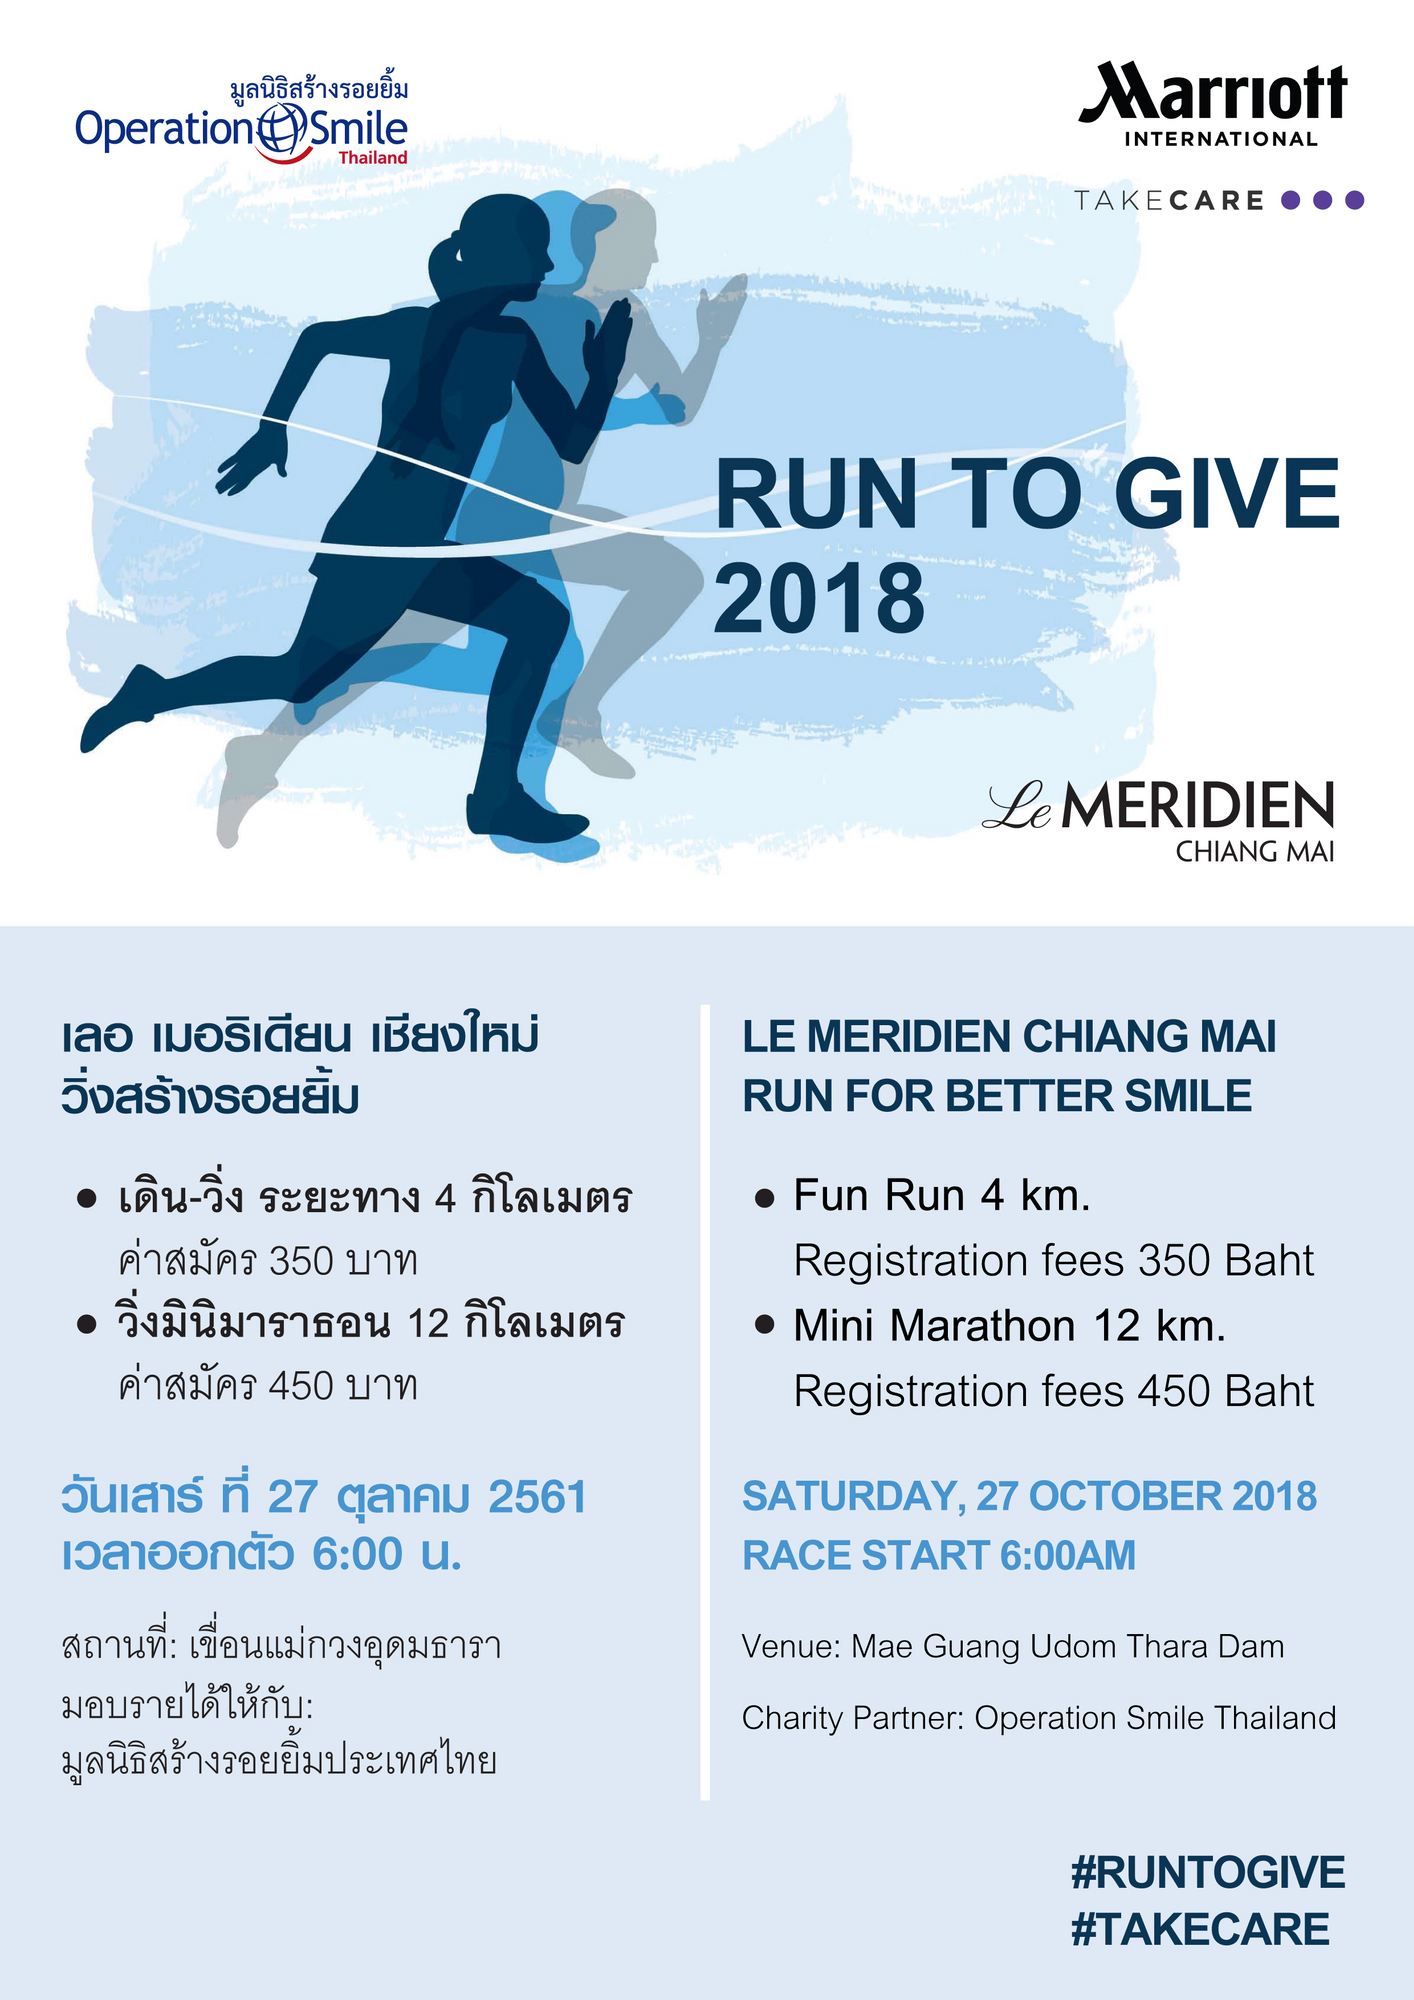 RUN TO GIVE 2018–Le Meridien Chiang Mai Run for Better Smile